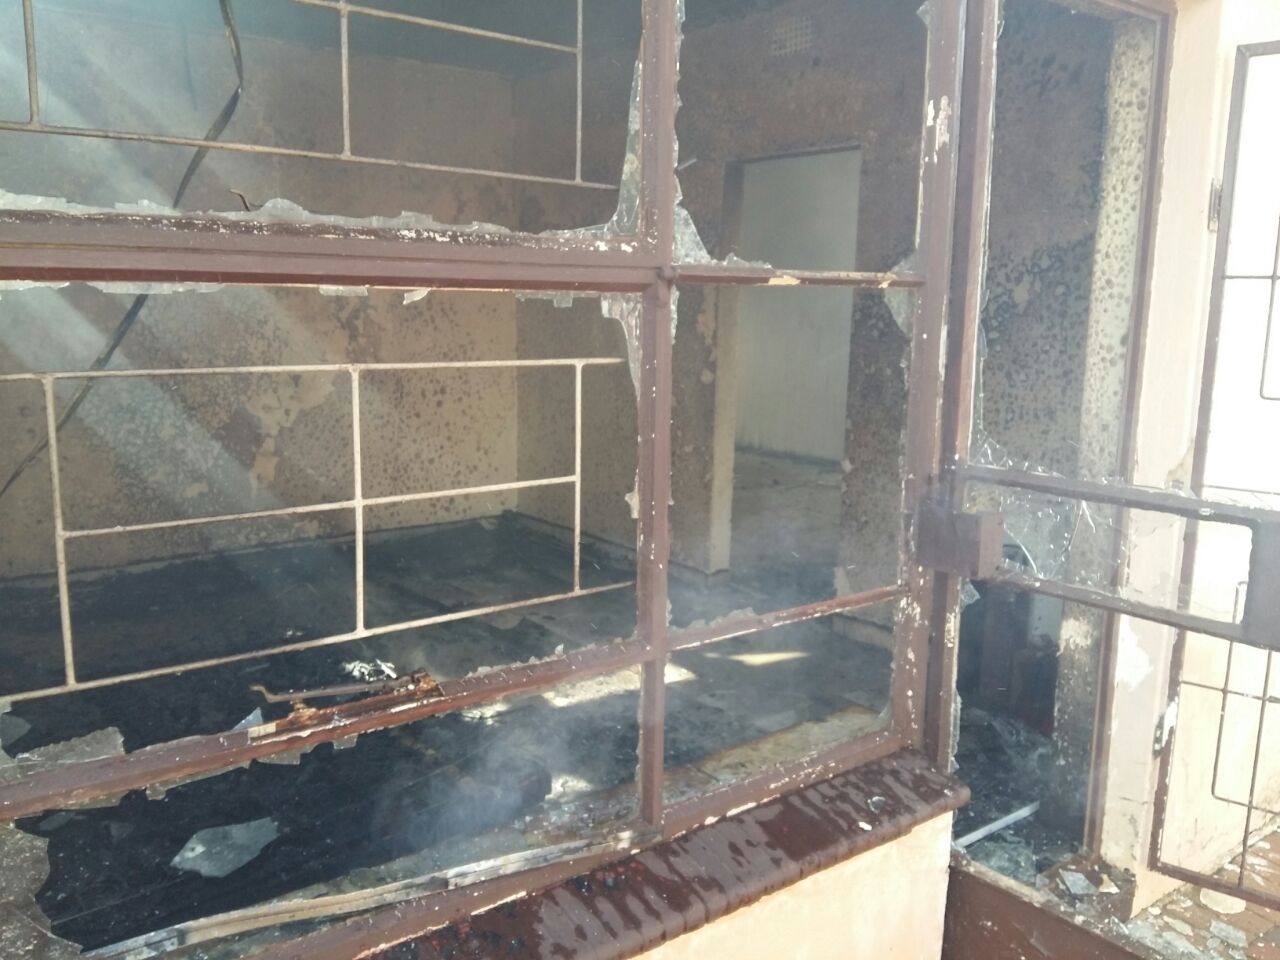 Five injured in house fire in Carletonville